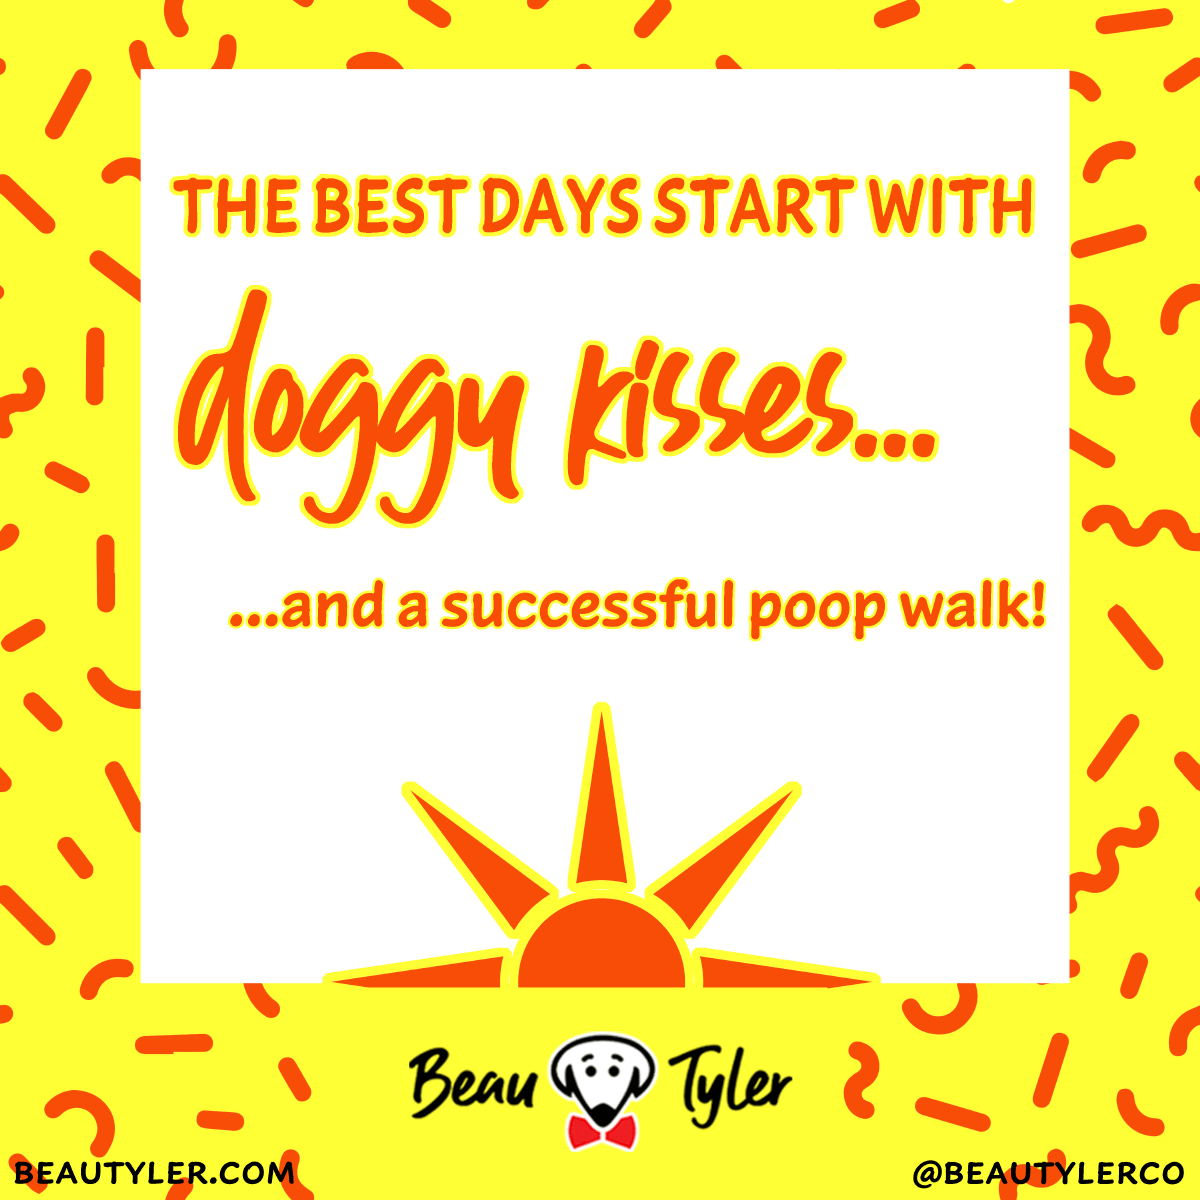 Beau Tyler print: The best days start with